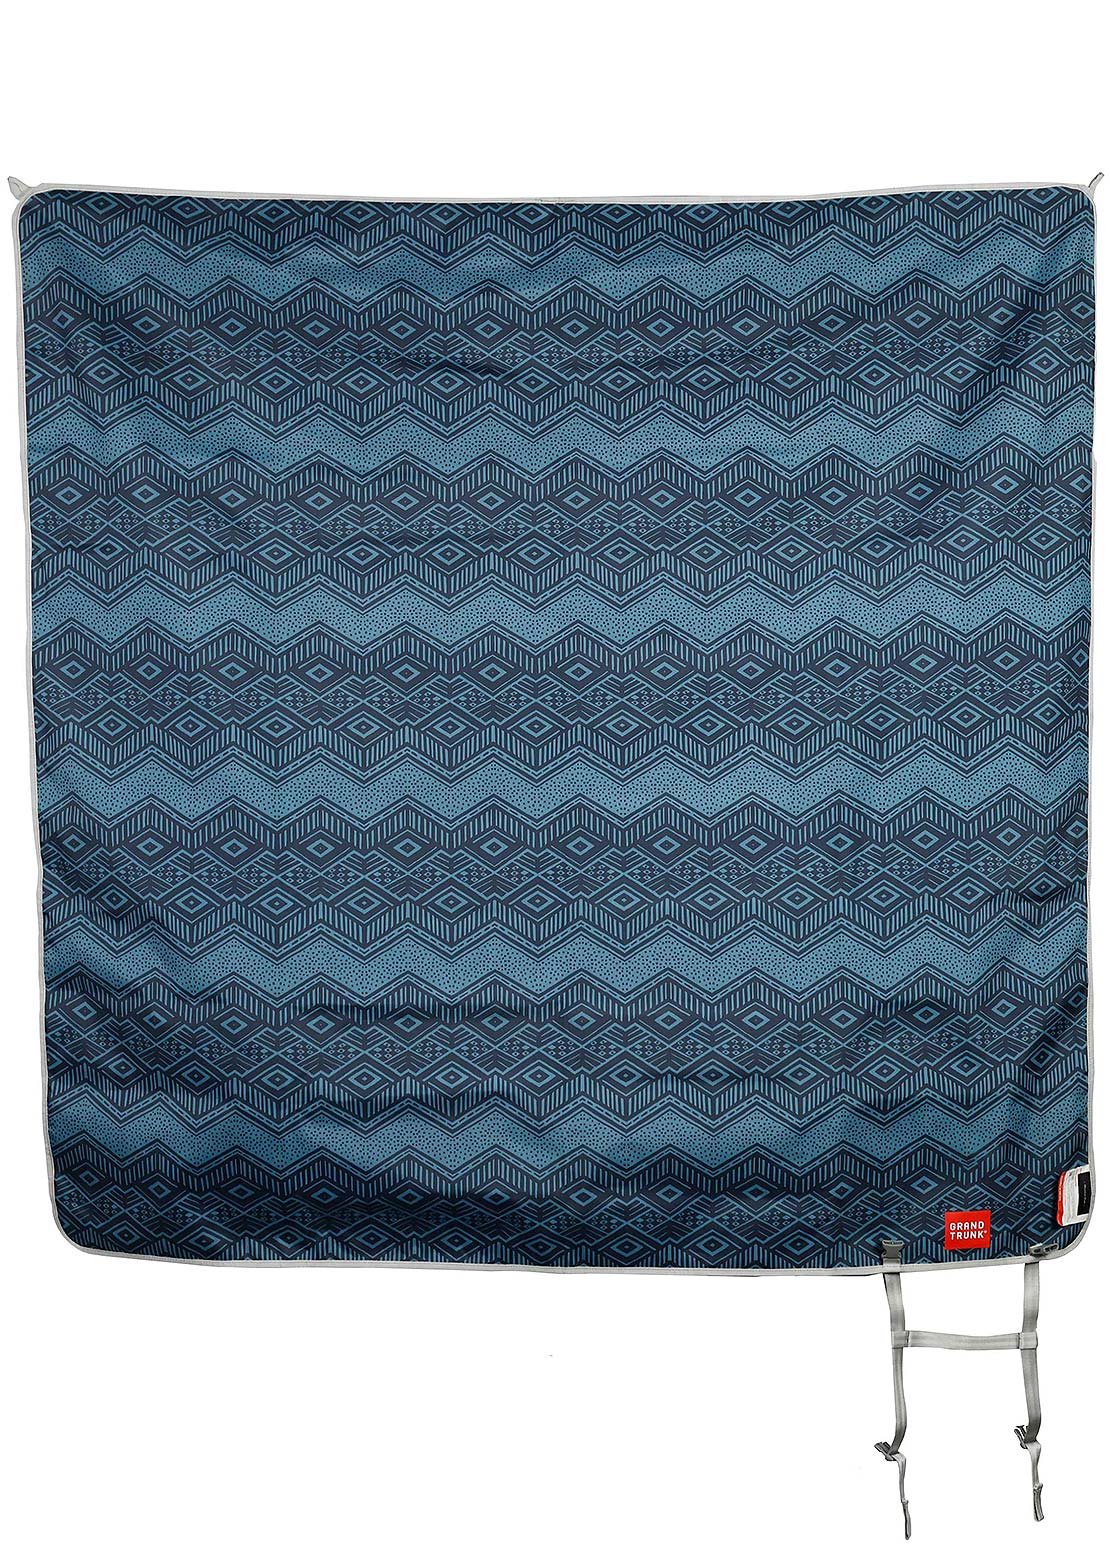 Grand Trunk Meadow Mat - Large Blue Nile